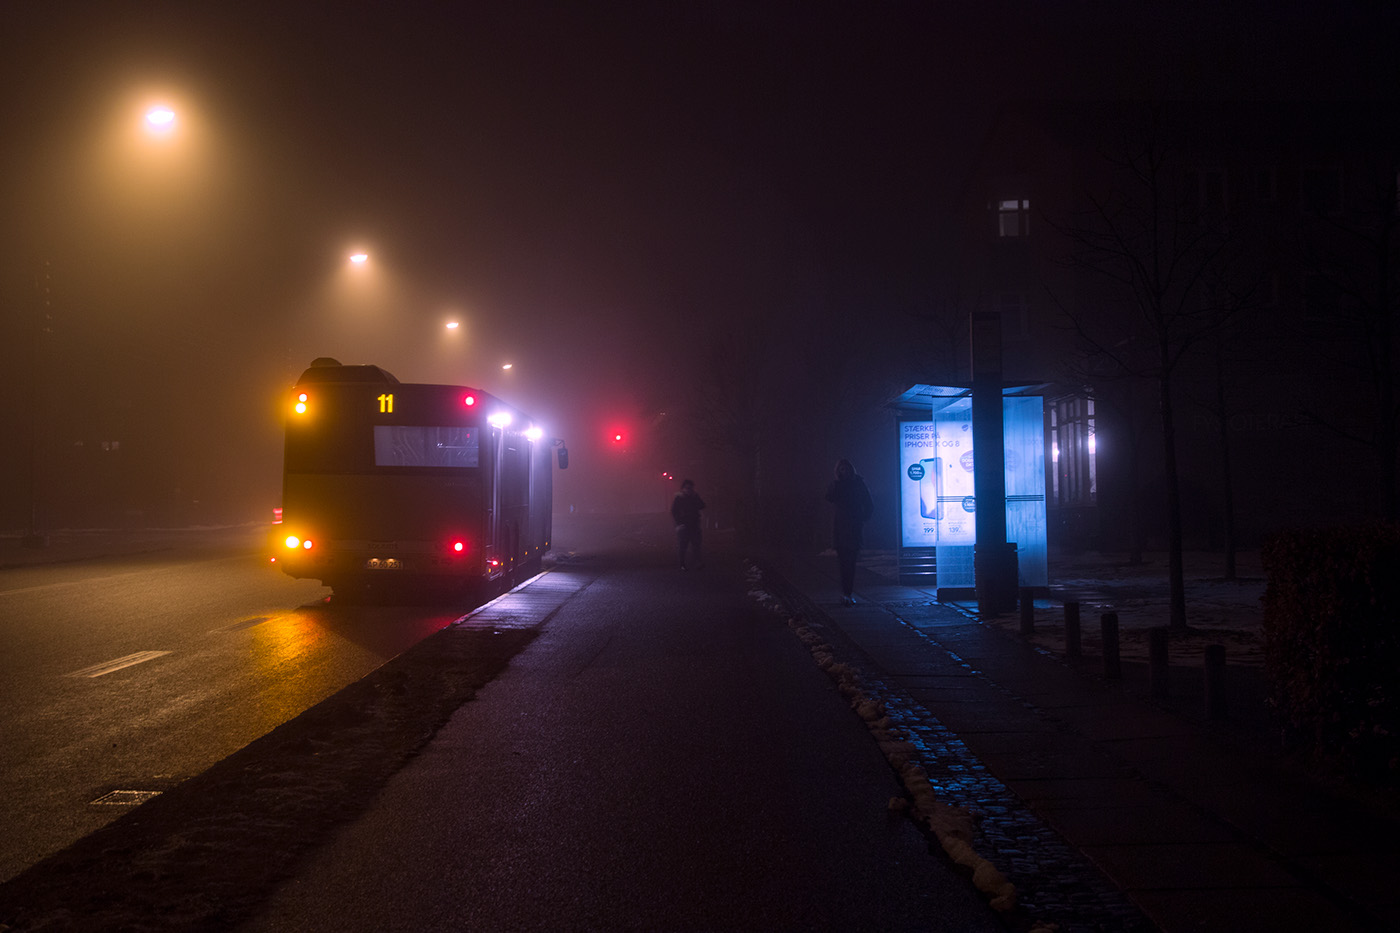 nightphotography Moody nordicnoir foggy streetphotography cityscapes citylights urbanscapes fineartphotography aarhus